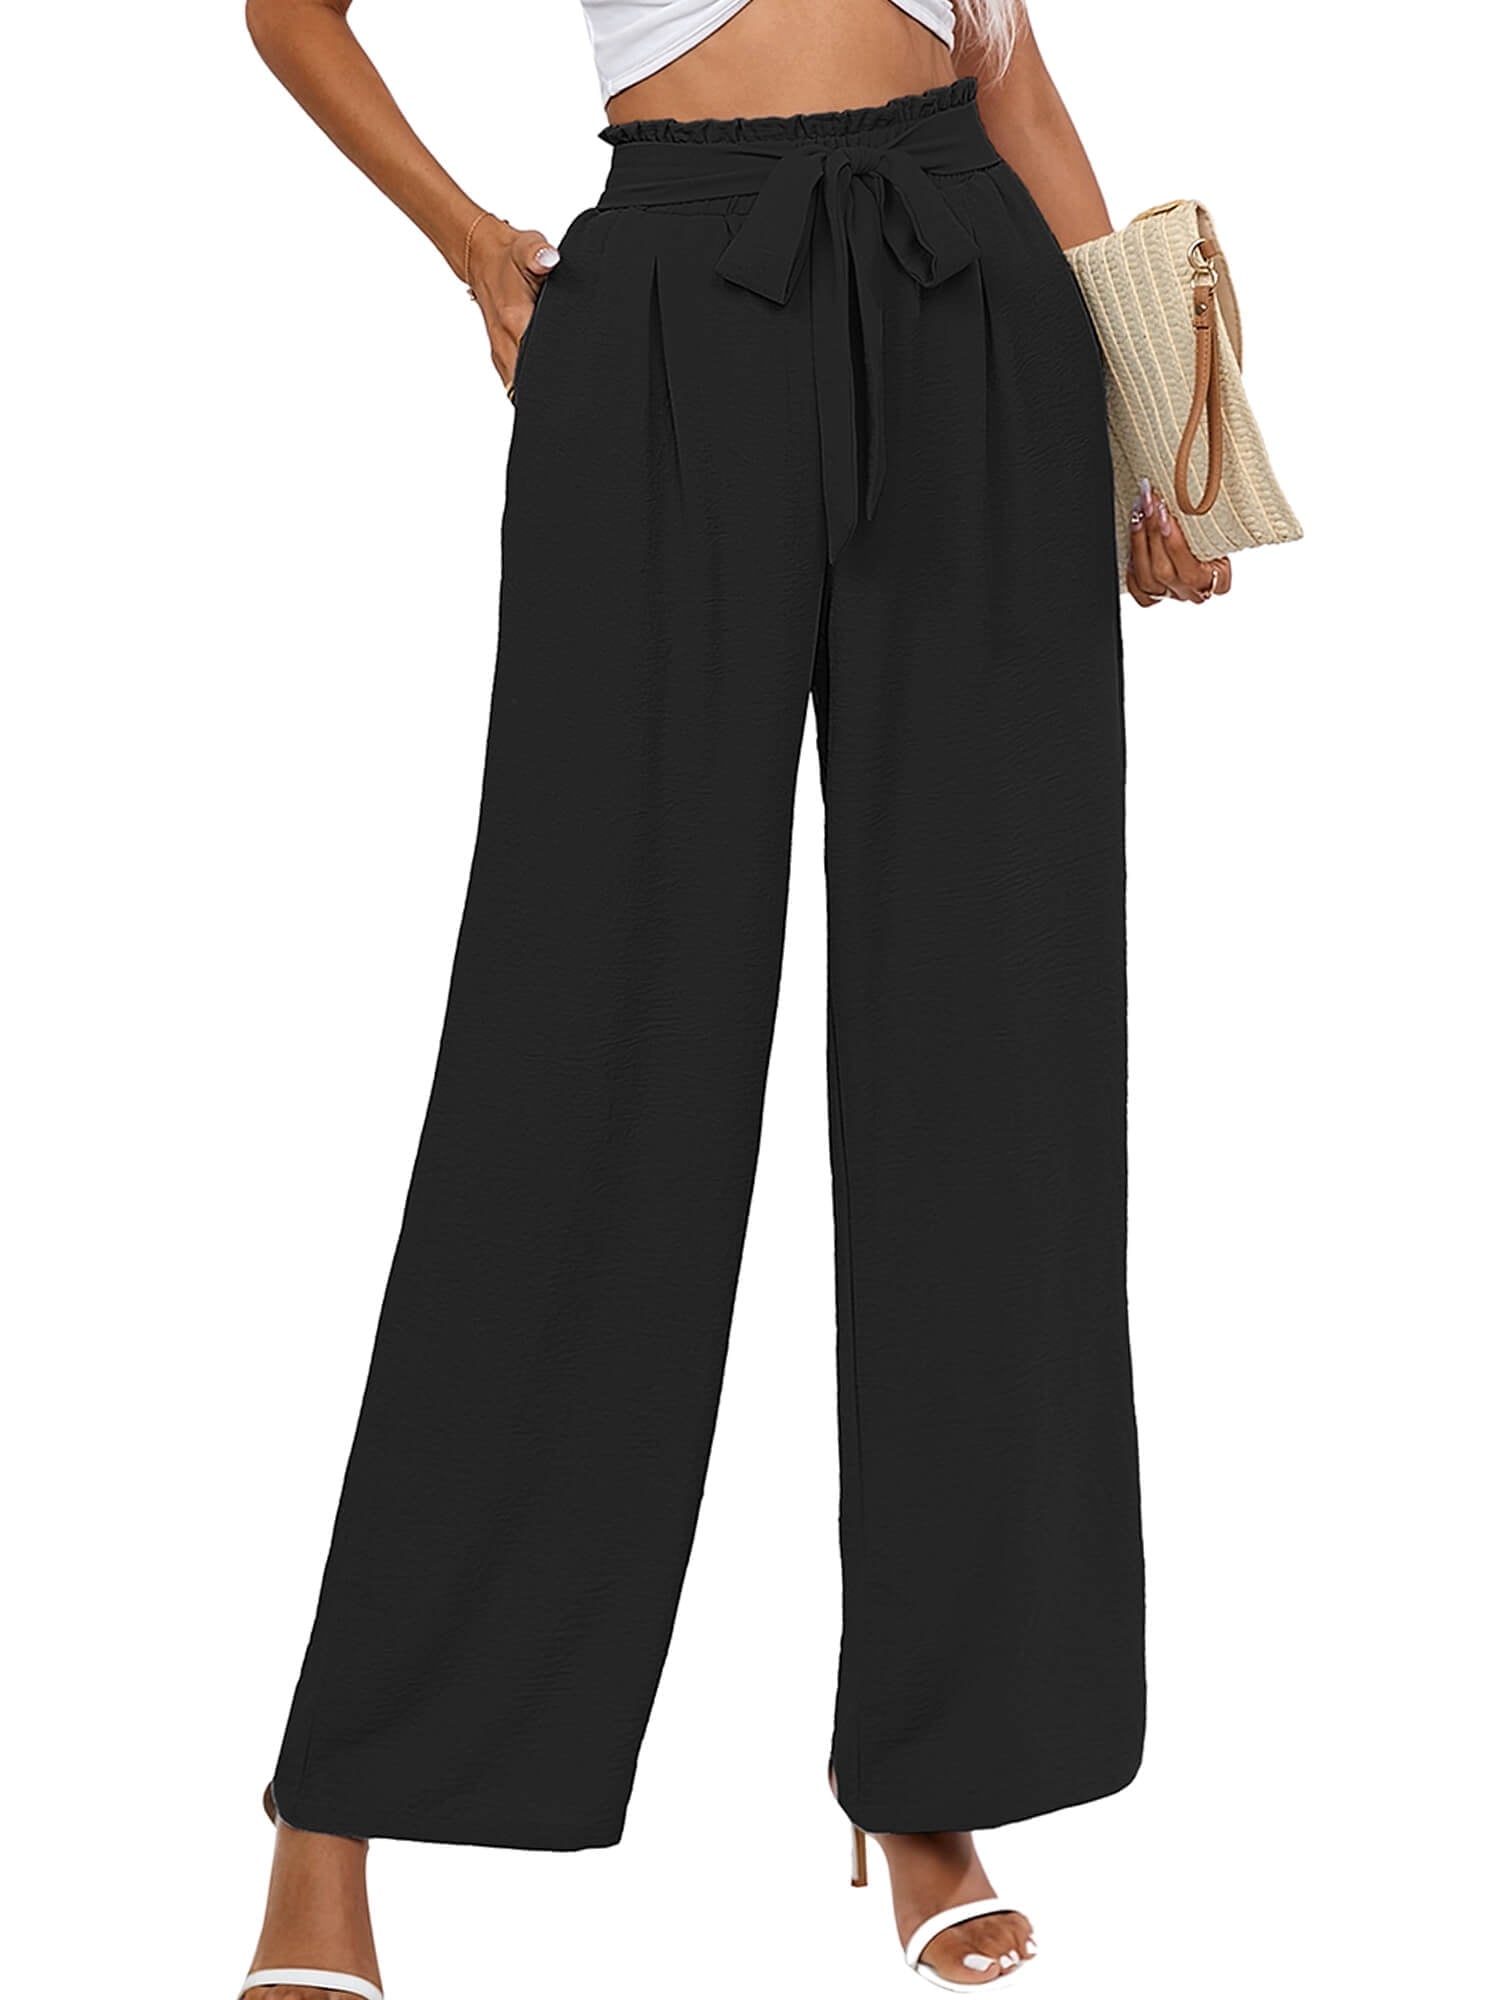 Mauritius Tropical Leaf Belted Wide Leg Pants